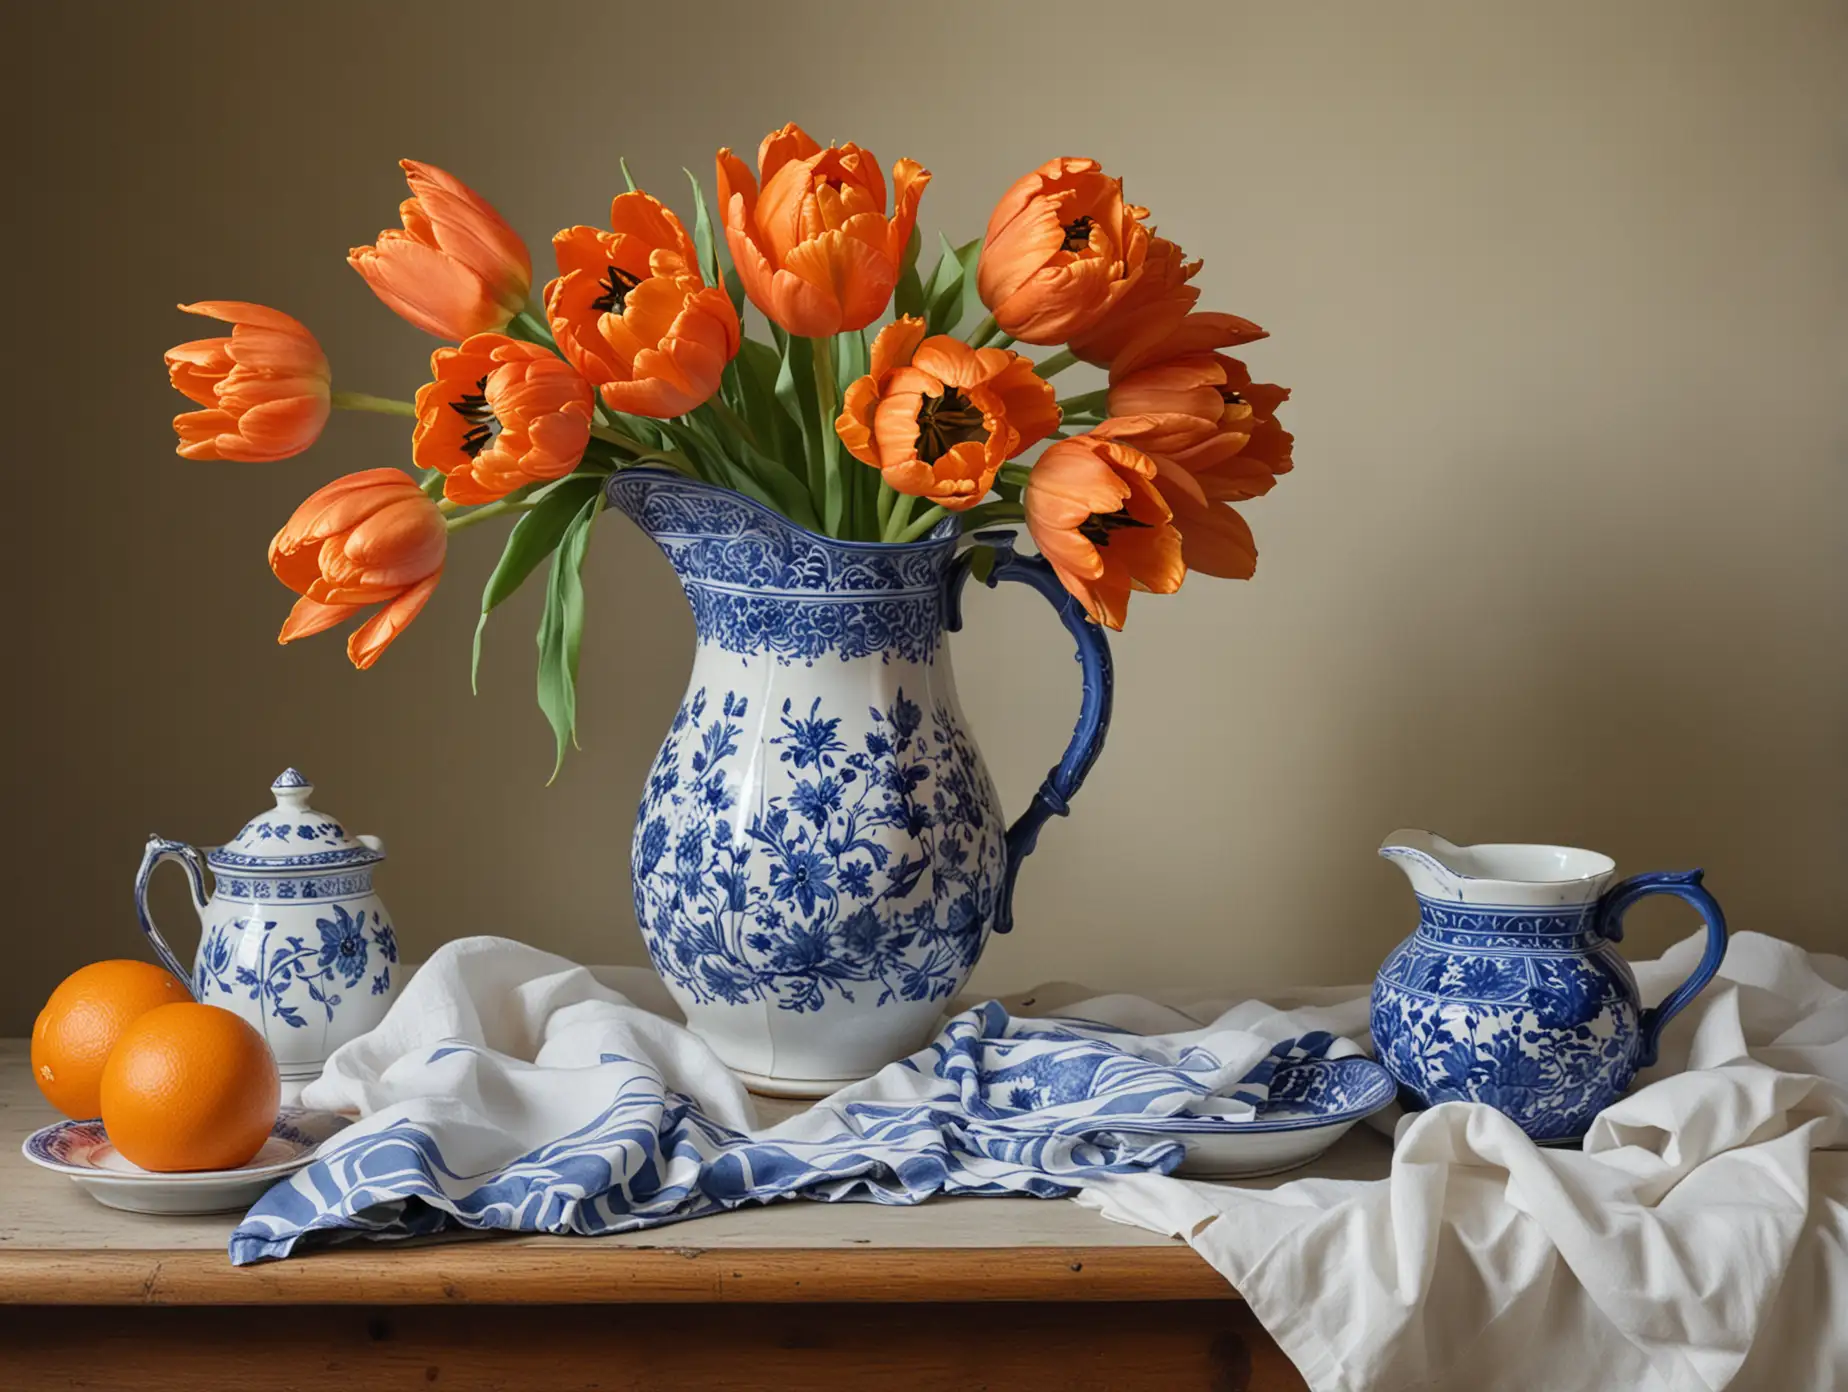 Classic Still Life Painting Blue and White China Pitcher Oranges and Tulips